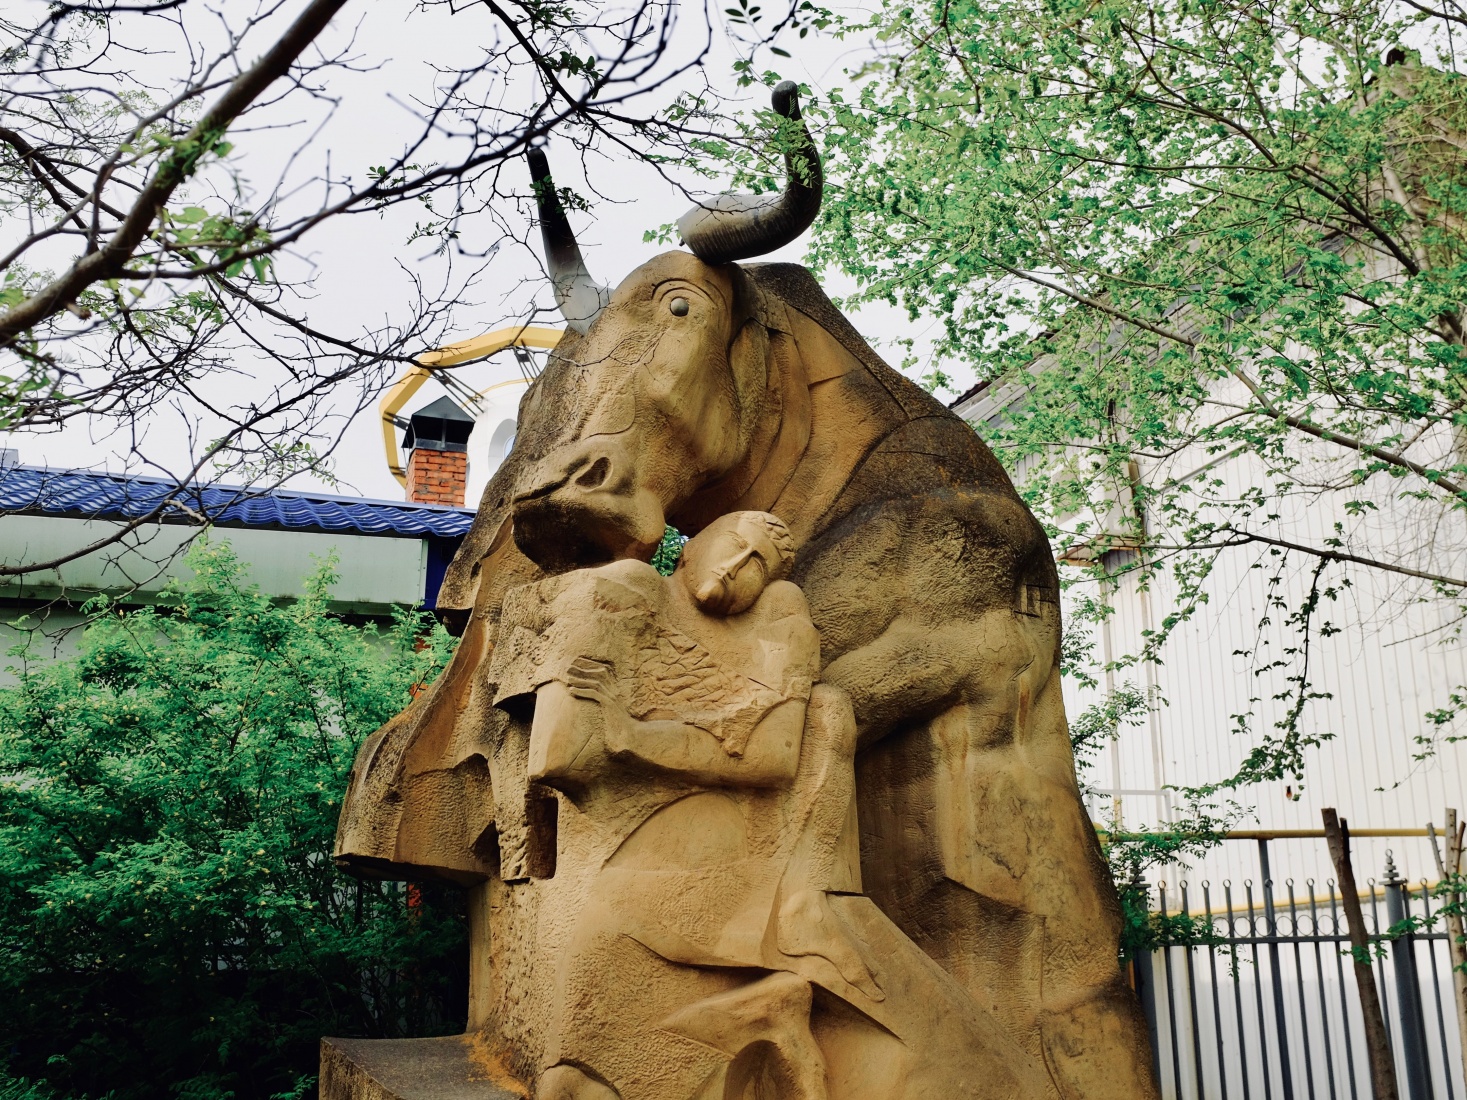 Sculpture on the sidewalk of Elista, Russia, depicting a man and a large horned mammal, possibly a Kalmyk cattle.